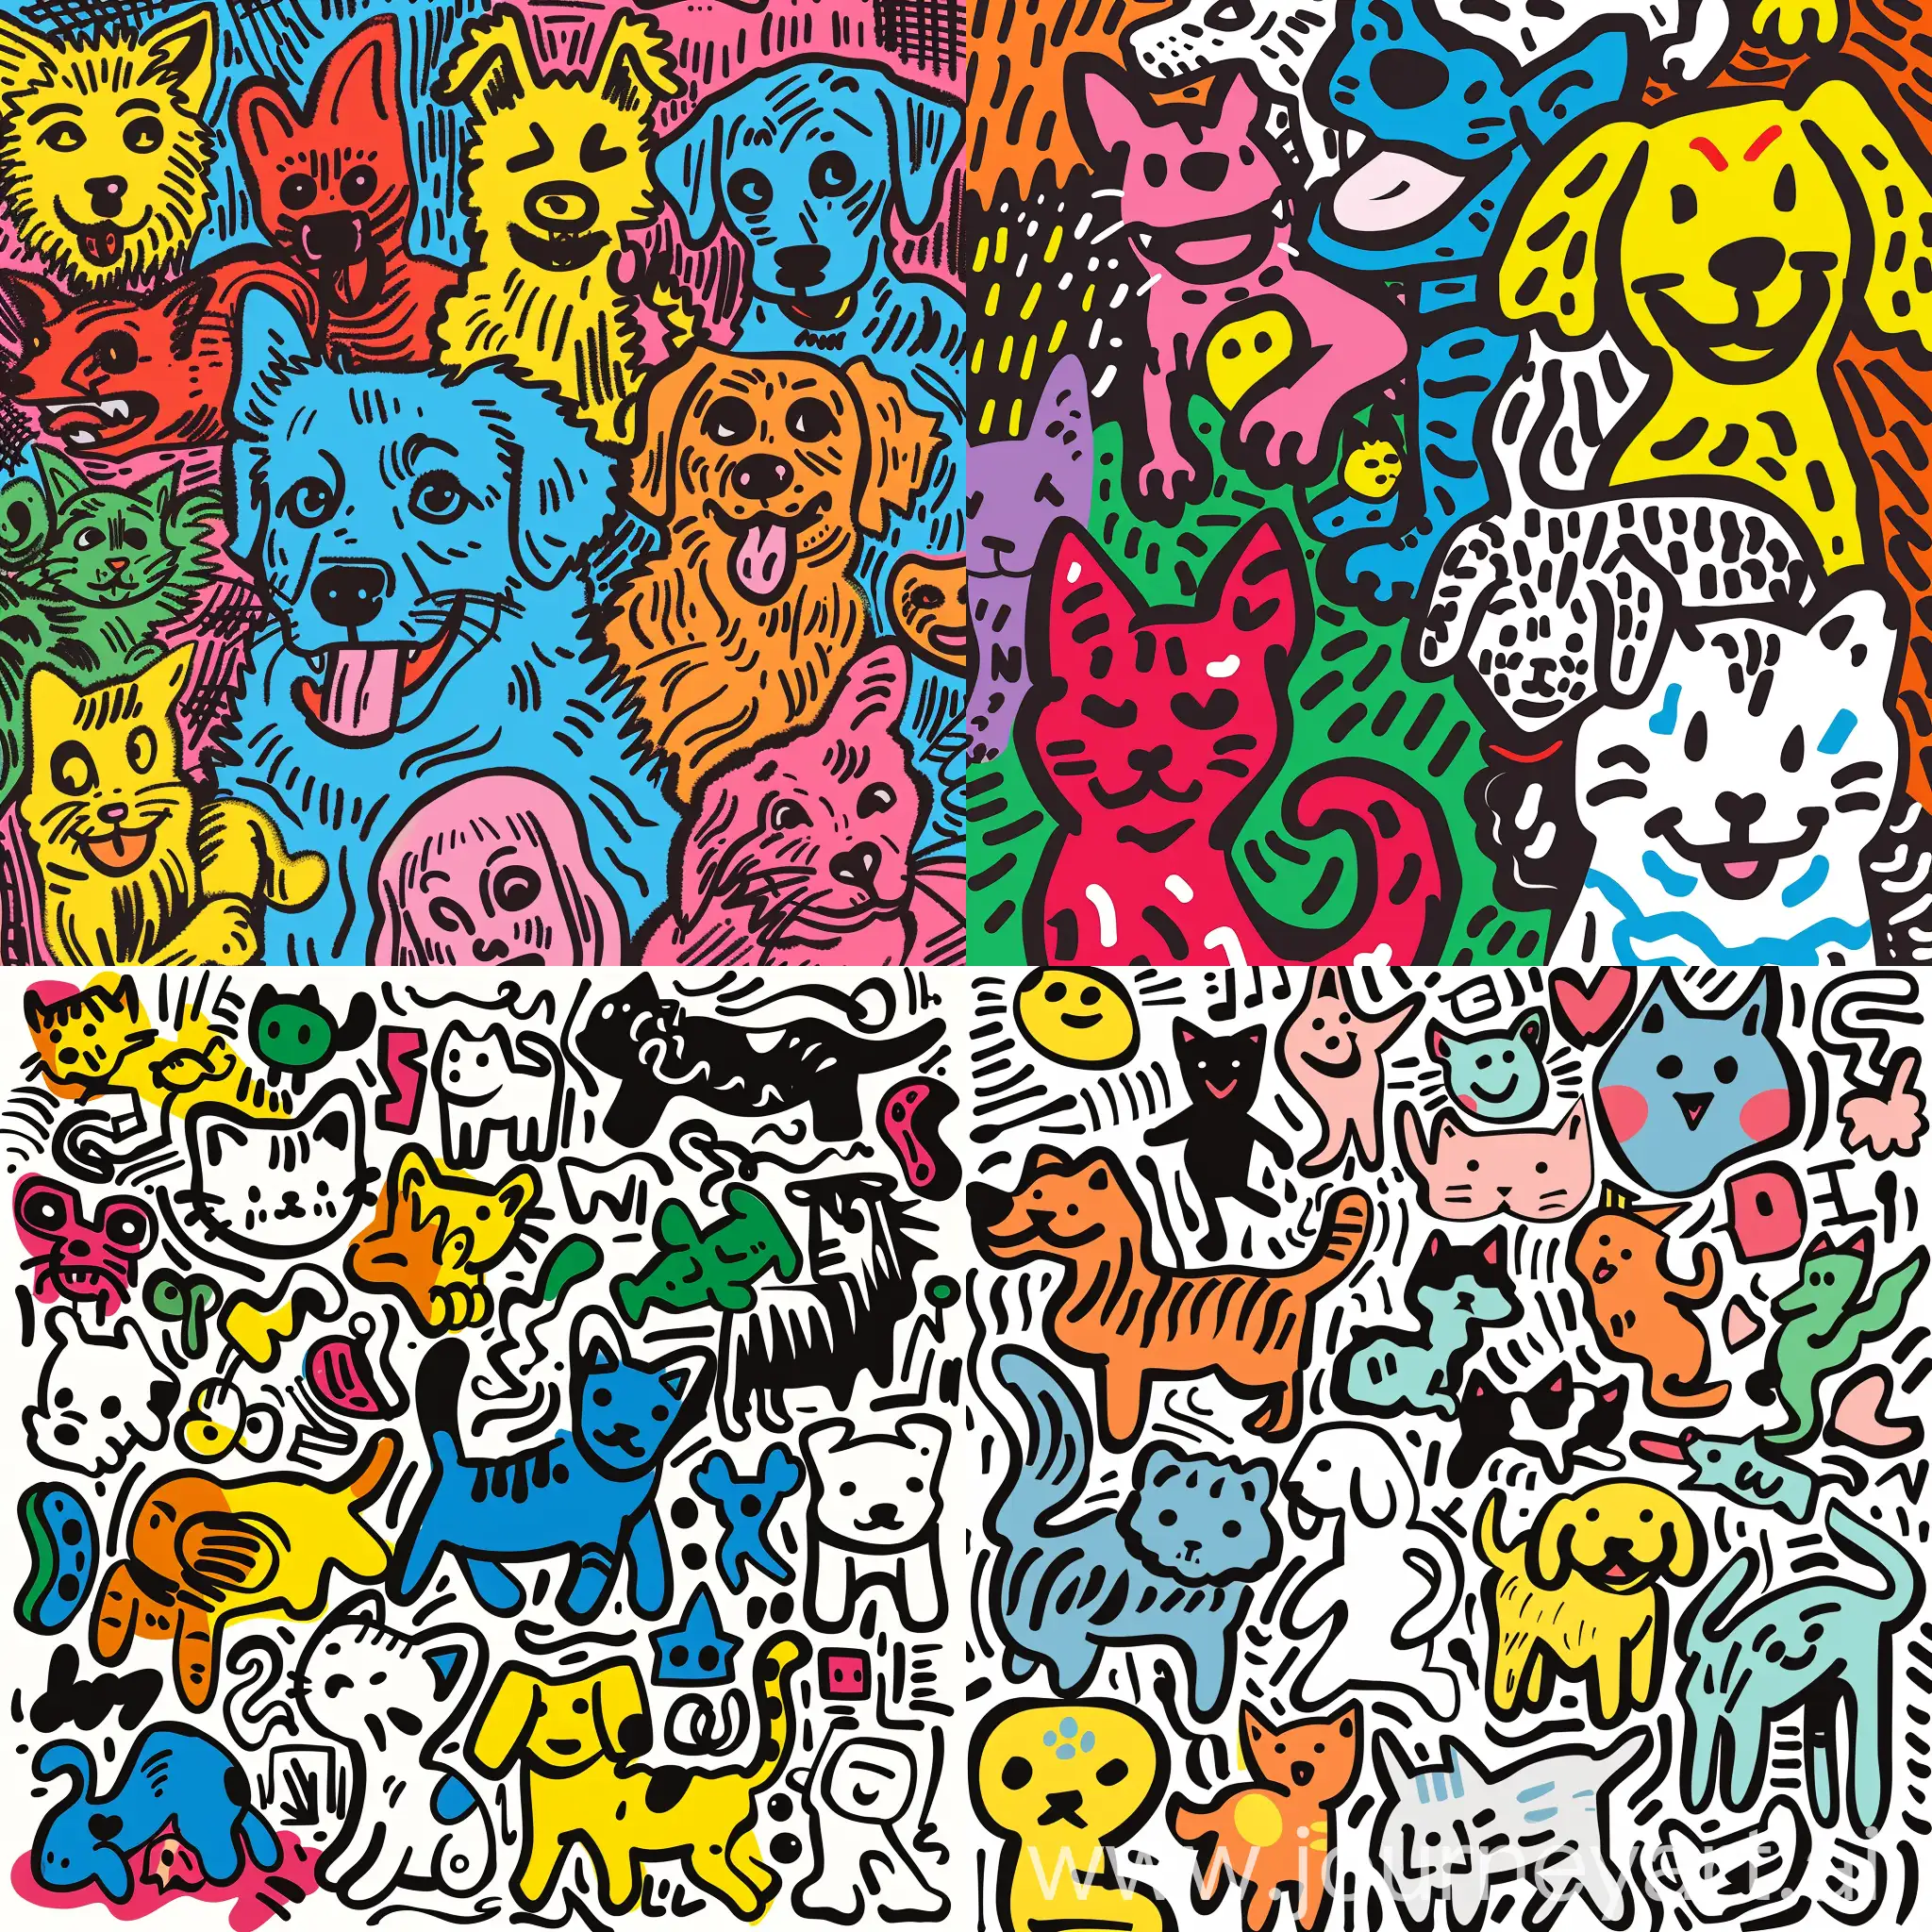 Urban-Sharpie-Illustration-Campus-Stray-Cats-and-Dogs-in-Keith-Haring-Style